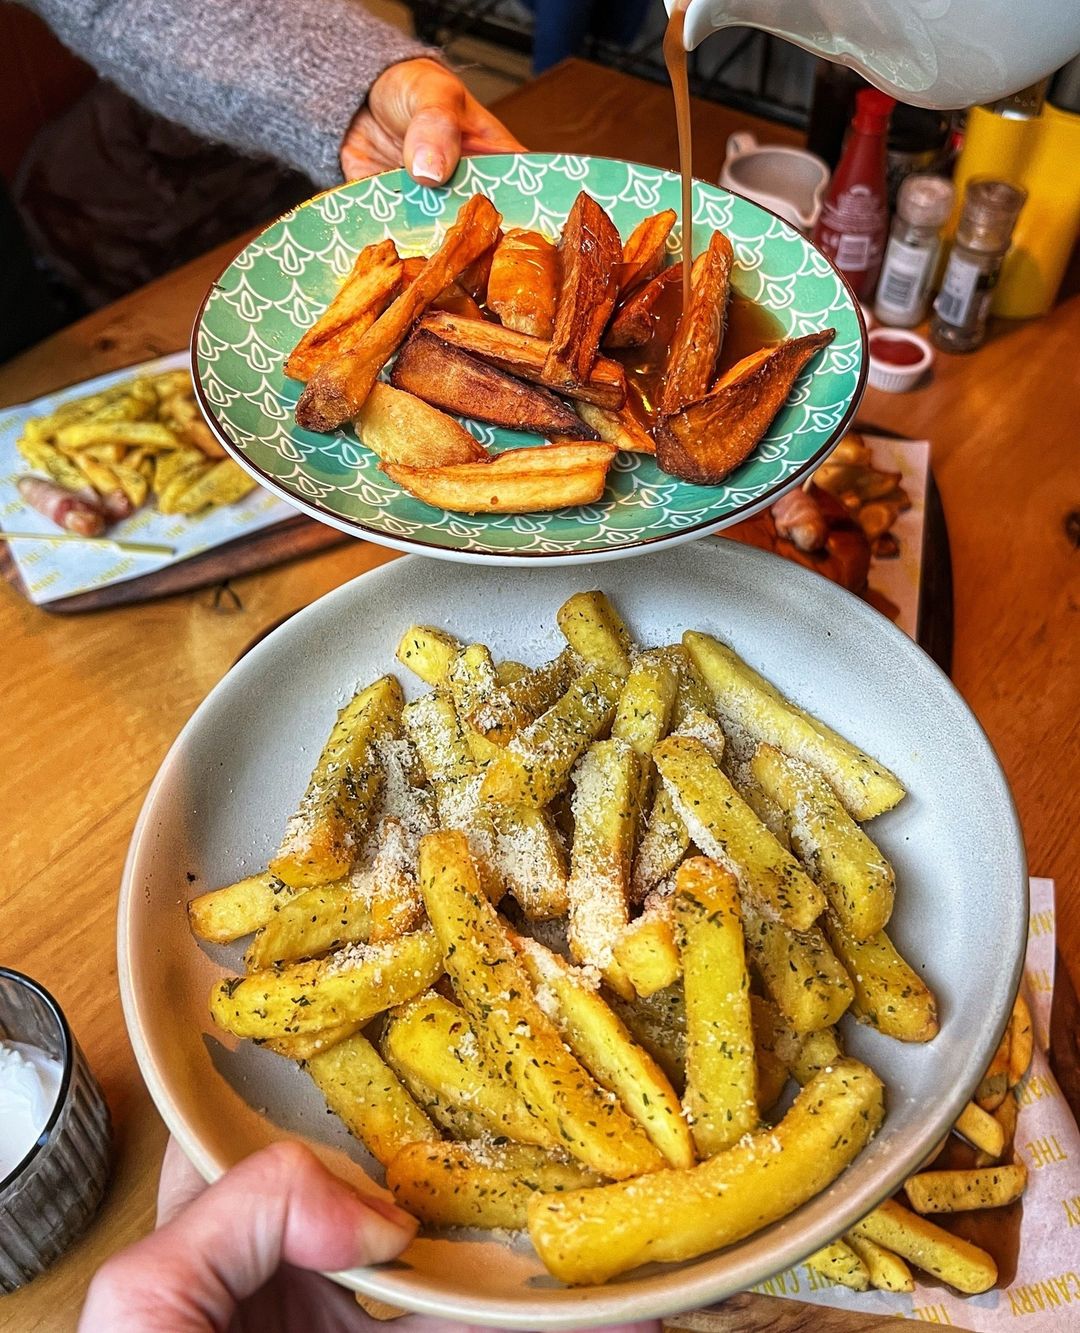 bowl of fries and sweet potato fries.